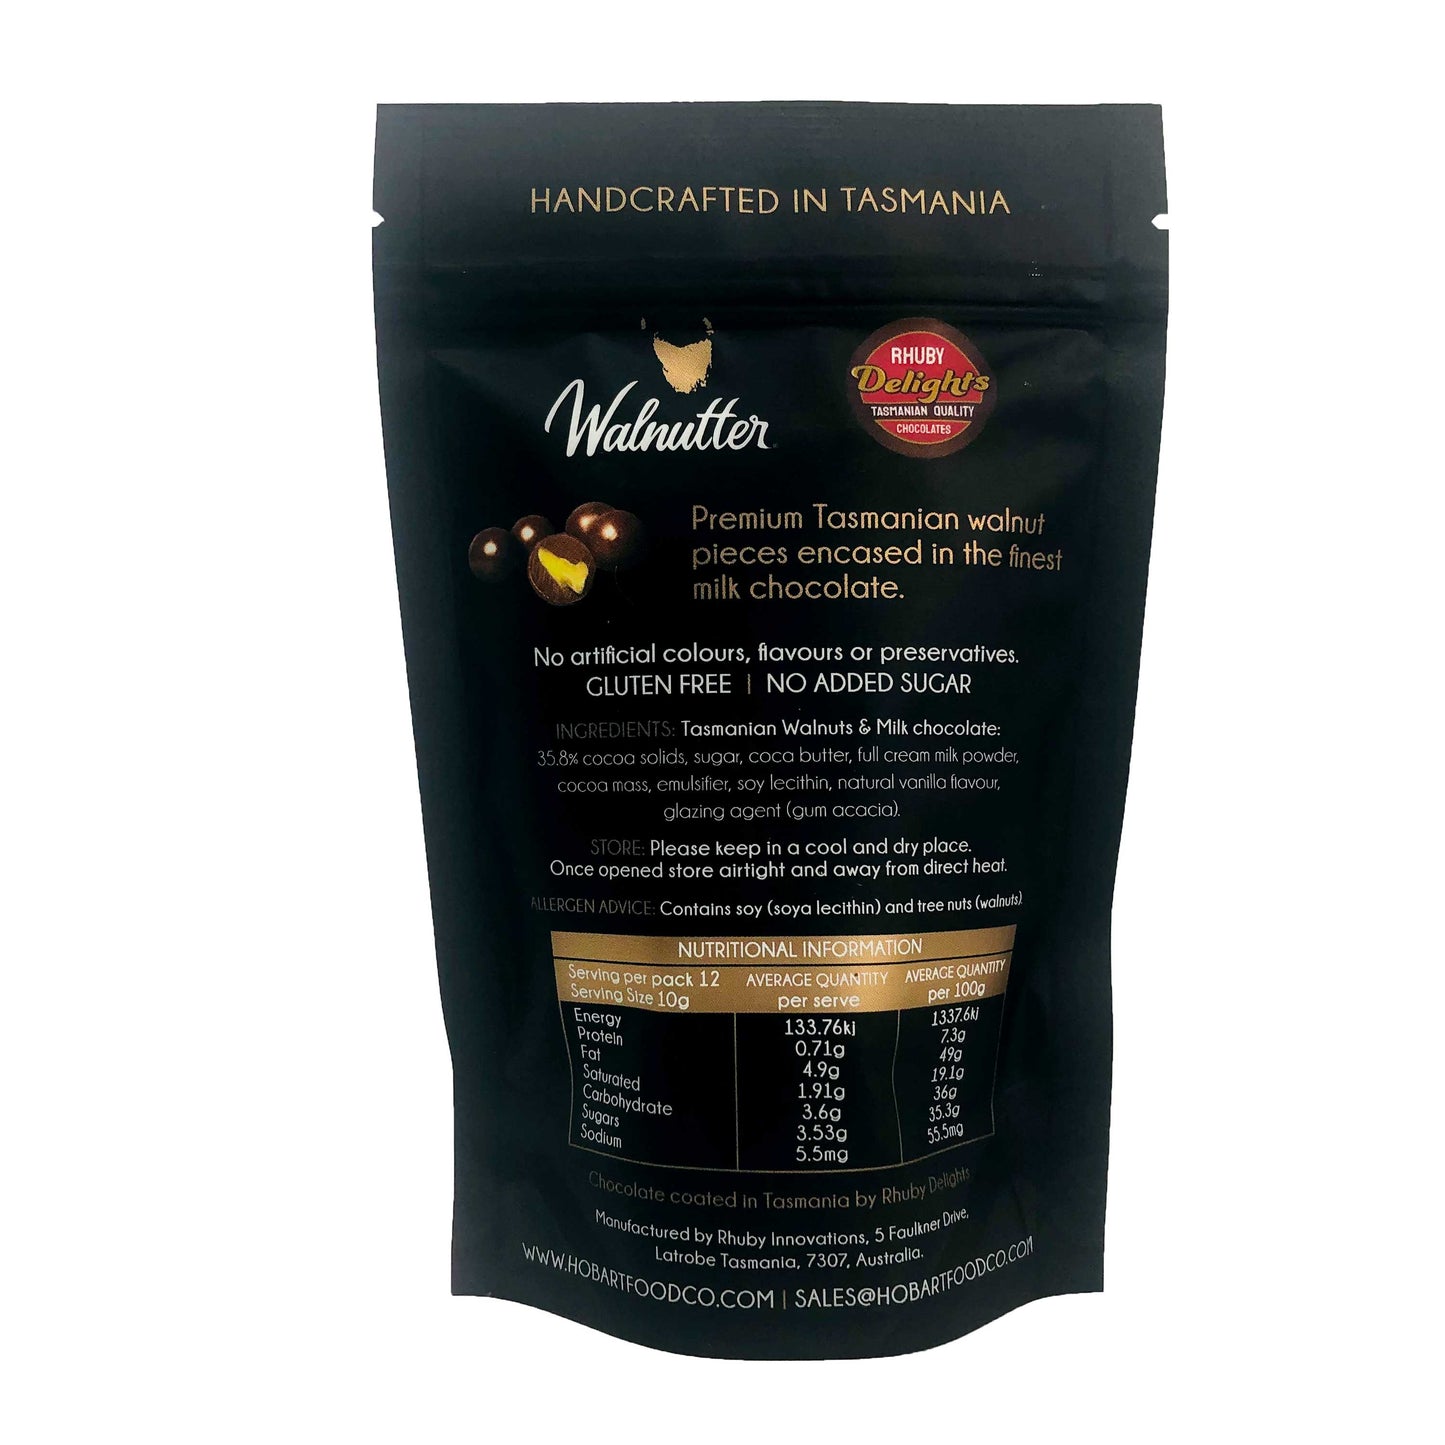 Premium. Tasmanian. Delicious. Walnutter Tasmanian premium walnuts coated in Milk Chocolate - Handcrafted in Tasmania - 120g black and gold foil pouch bag, image showing back of bag